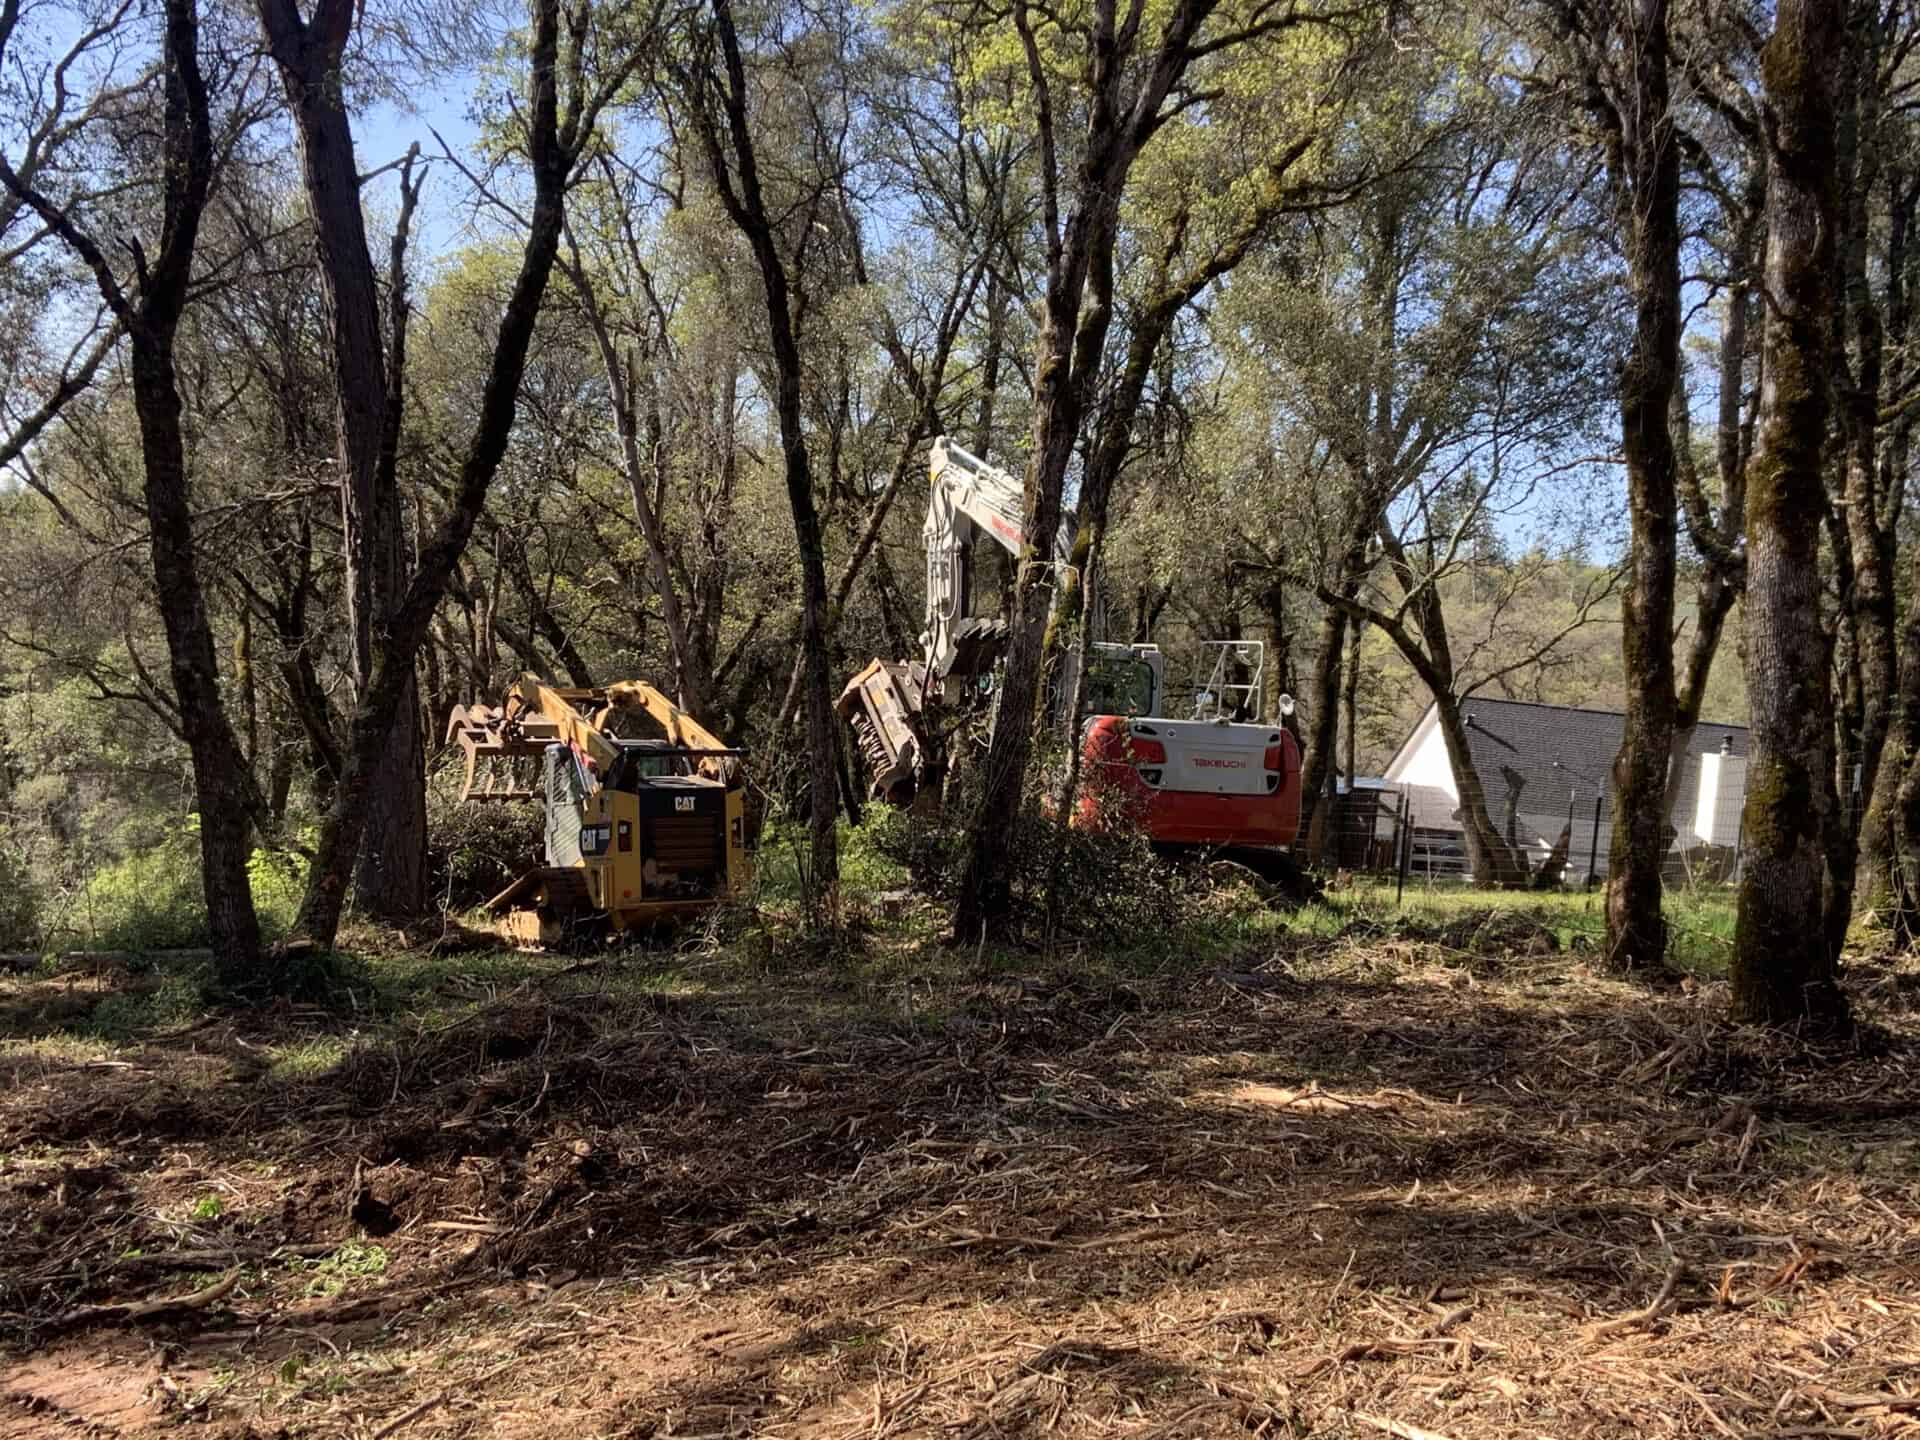 Dozer and masticator at work clearing trees and debris from forested land